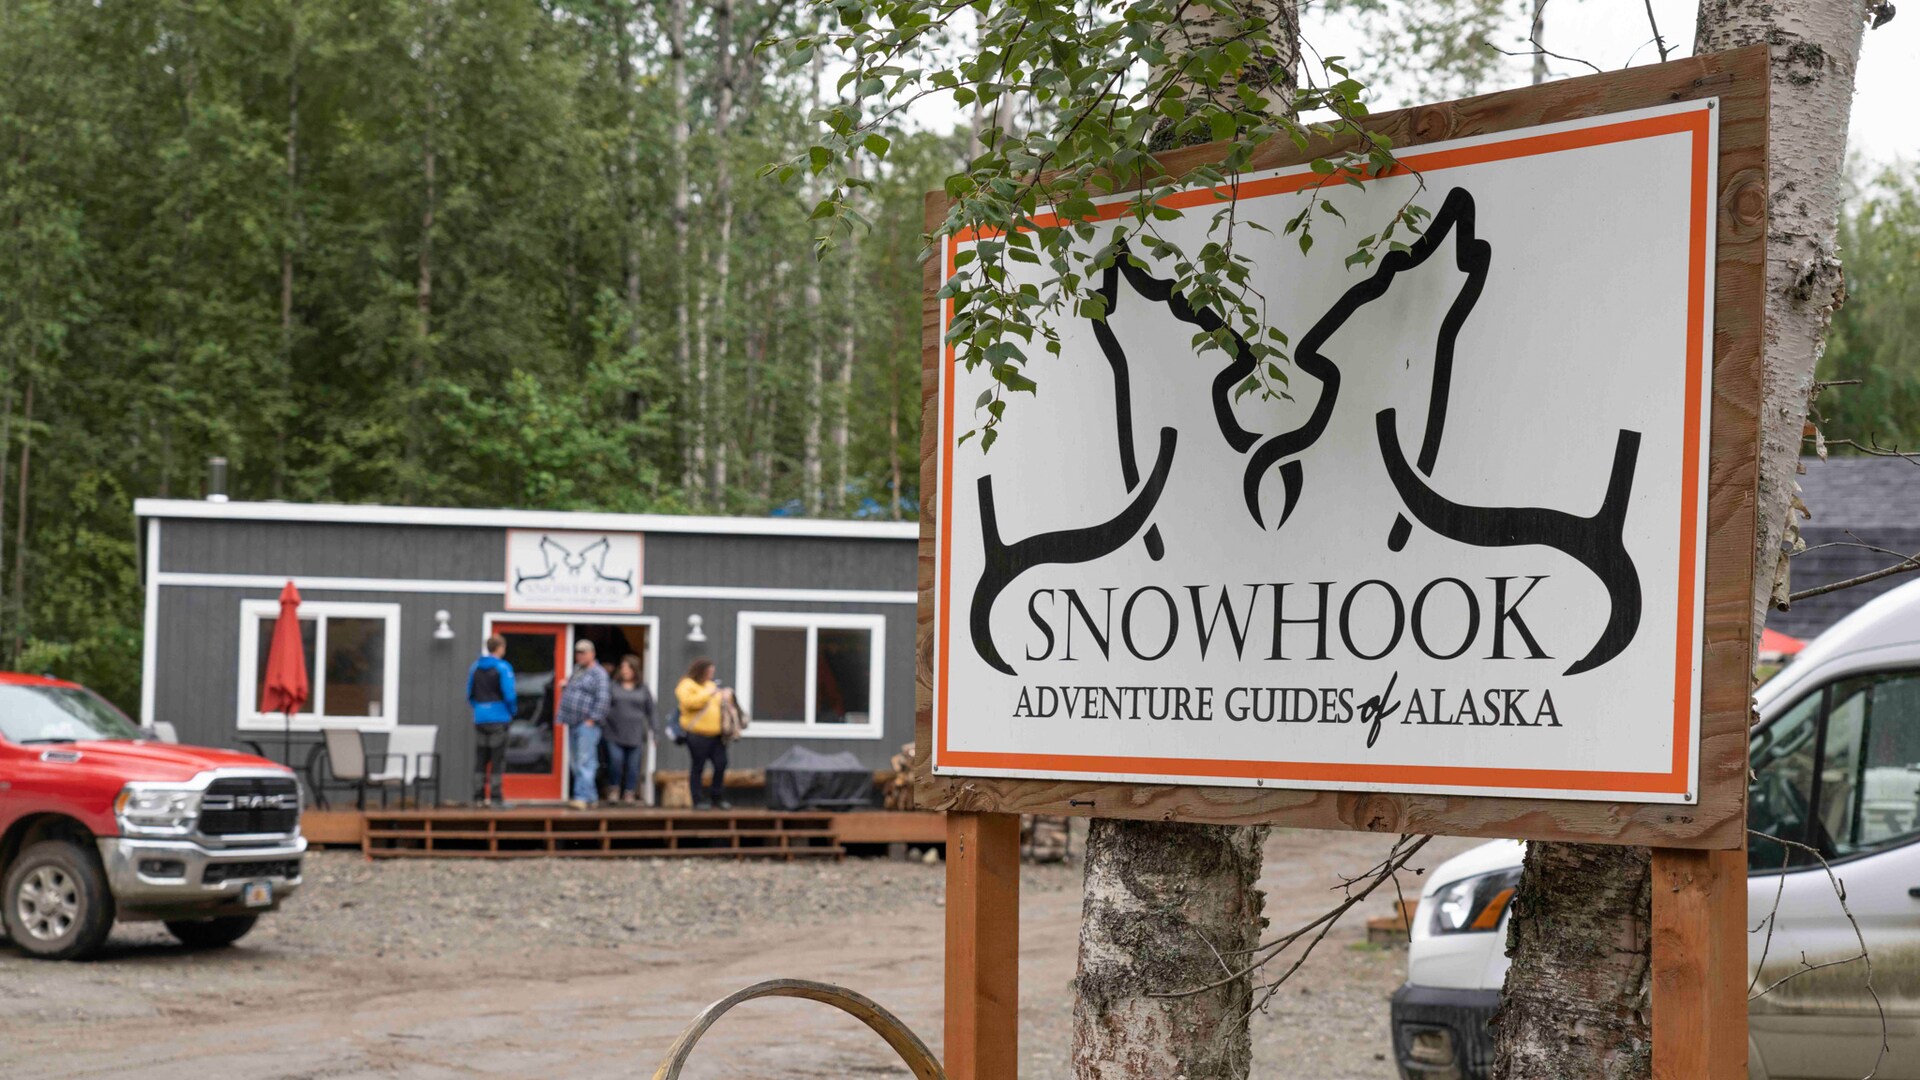 Snowhook Adventure Guides of Alaska: Your Expert Partners for Adventure